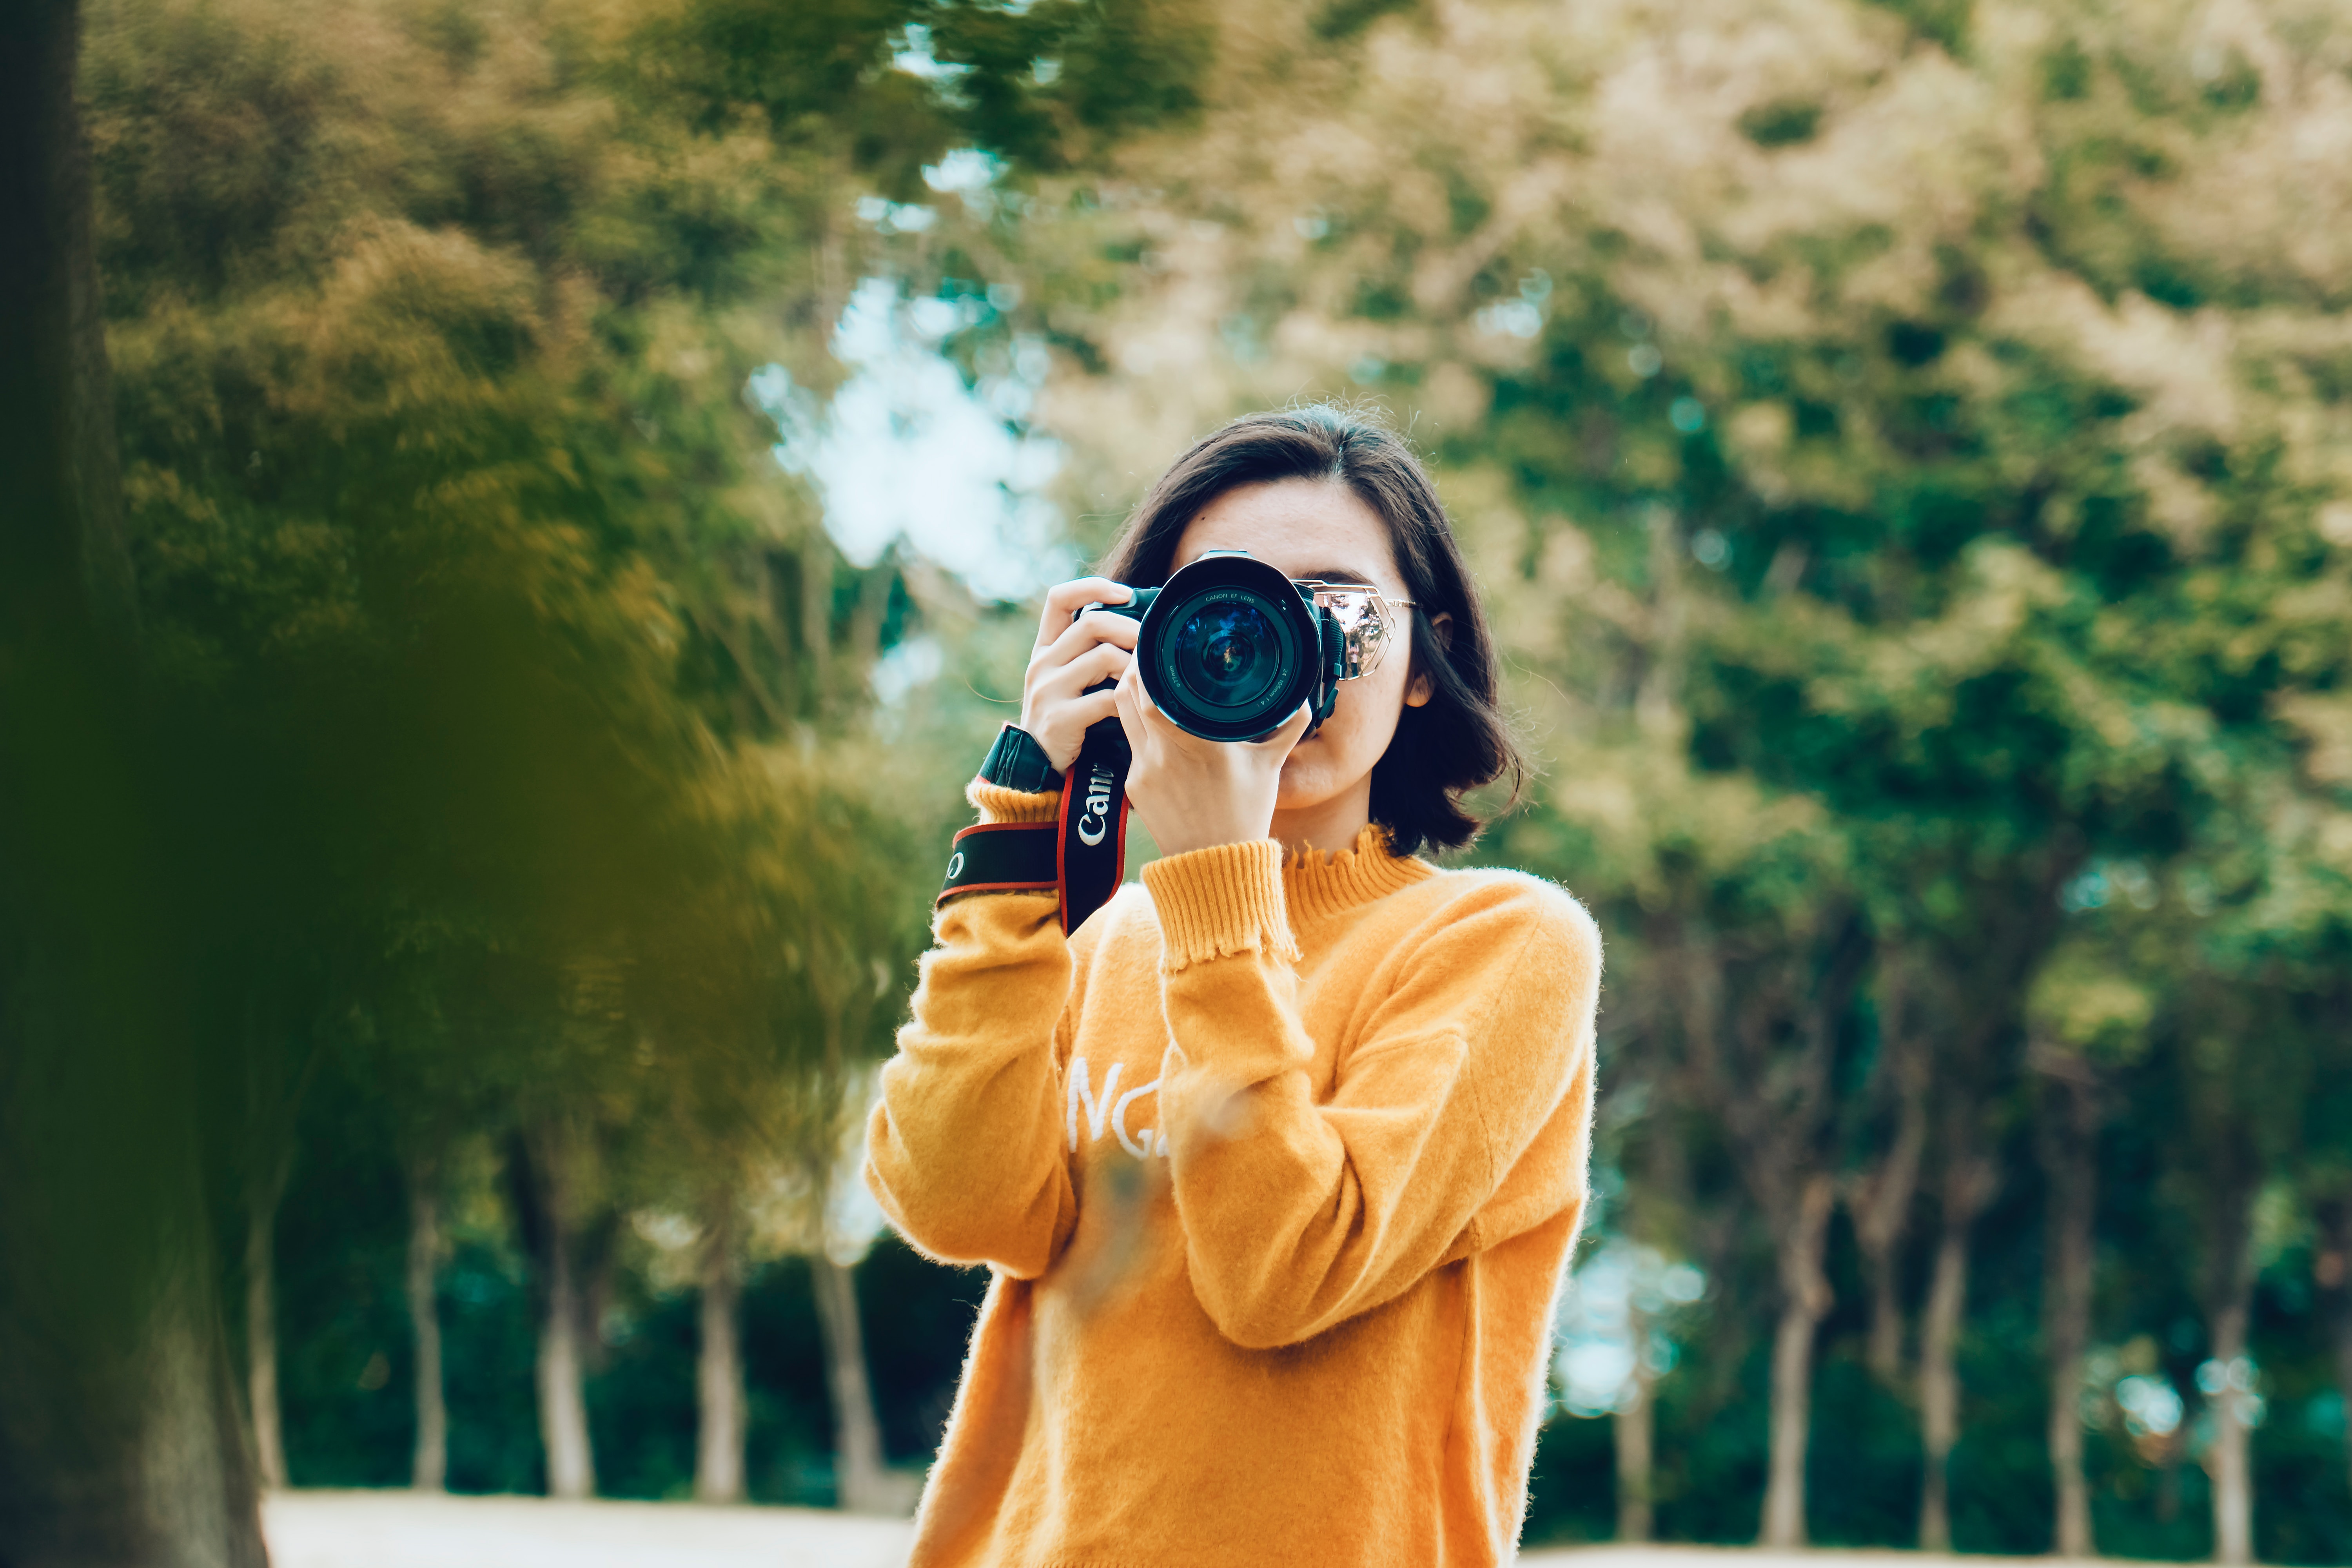 Woman holding camera standing outside with trees